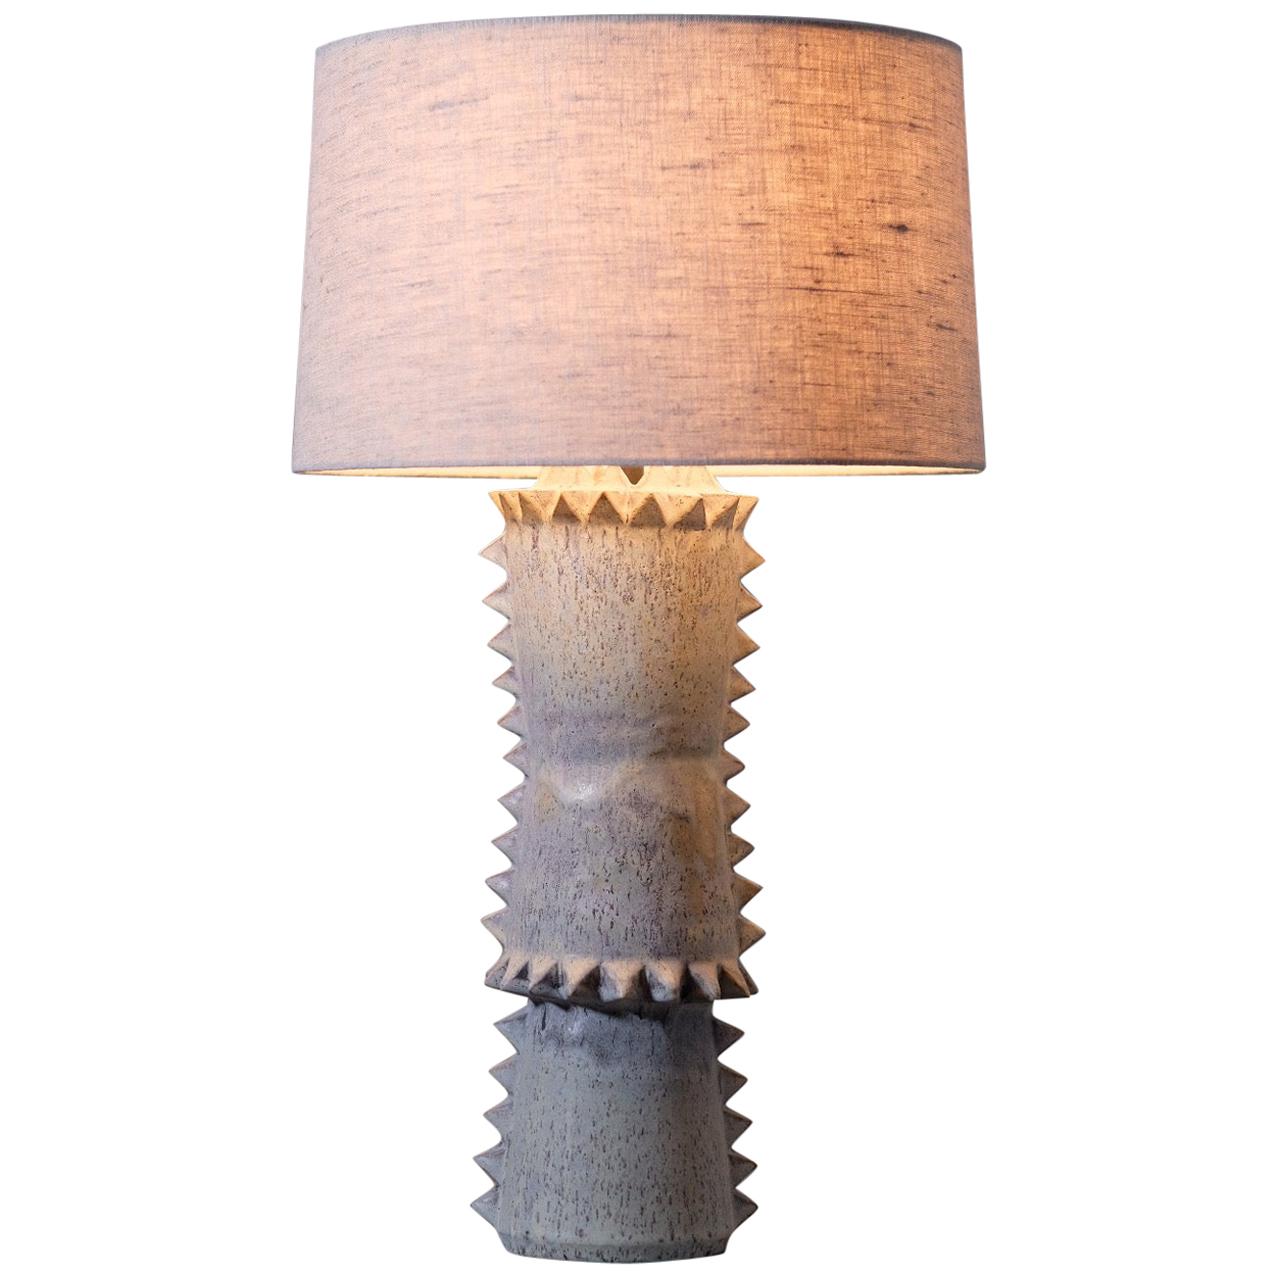 Studded Stoneware Table Lamp with Grey Linen Shade by LGS Studio For Sale